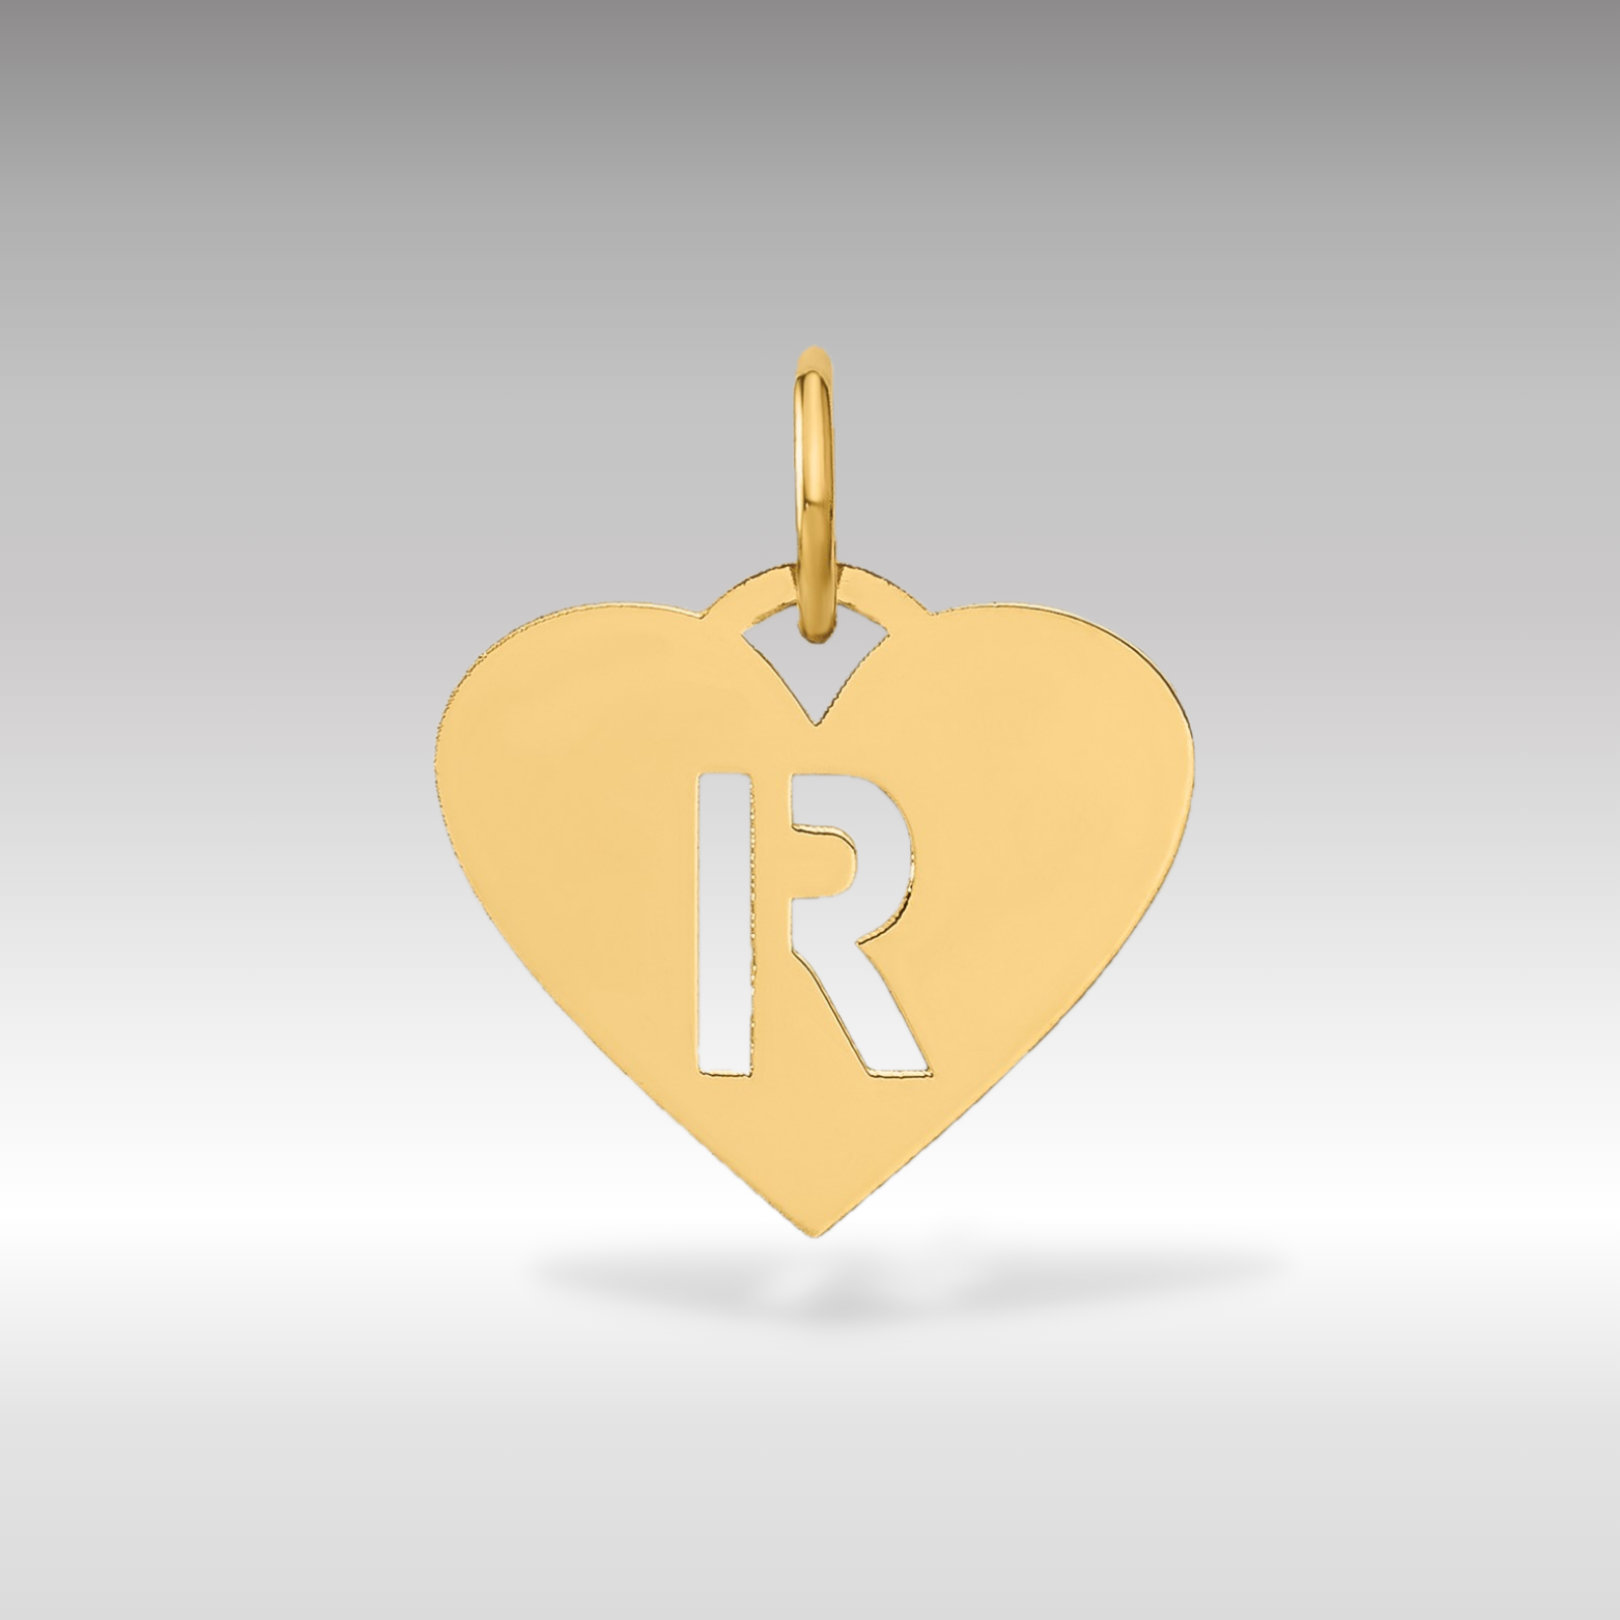 14K Gold Heart Pendant with Letter 'R' - Charlie & Co. Jewelry